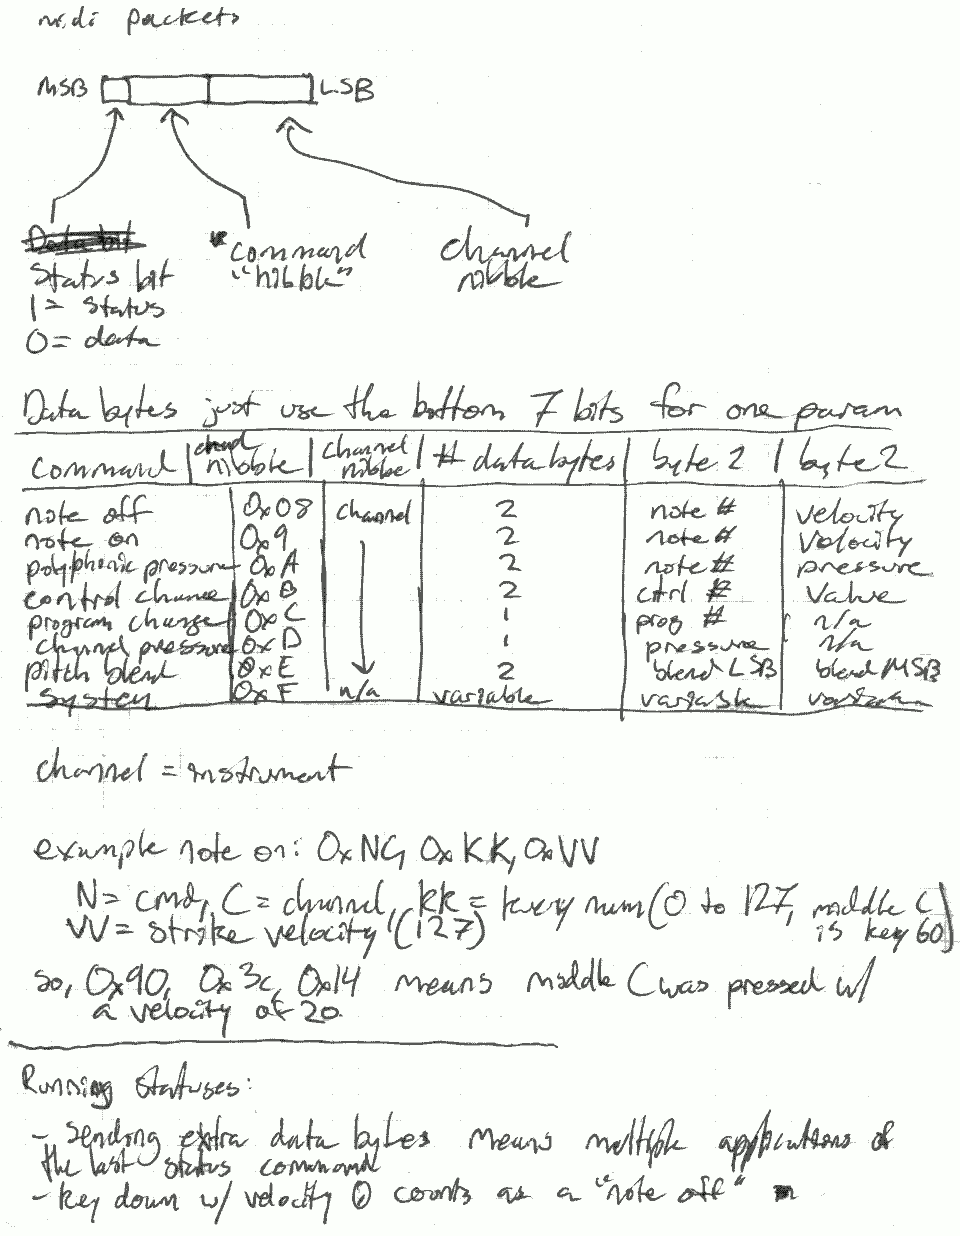 Scan of notes about the MIDI protocol